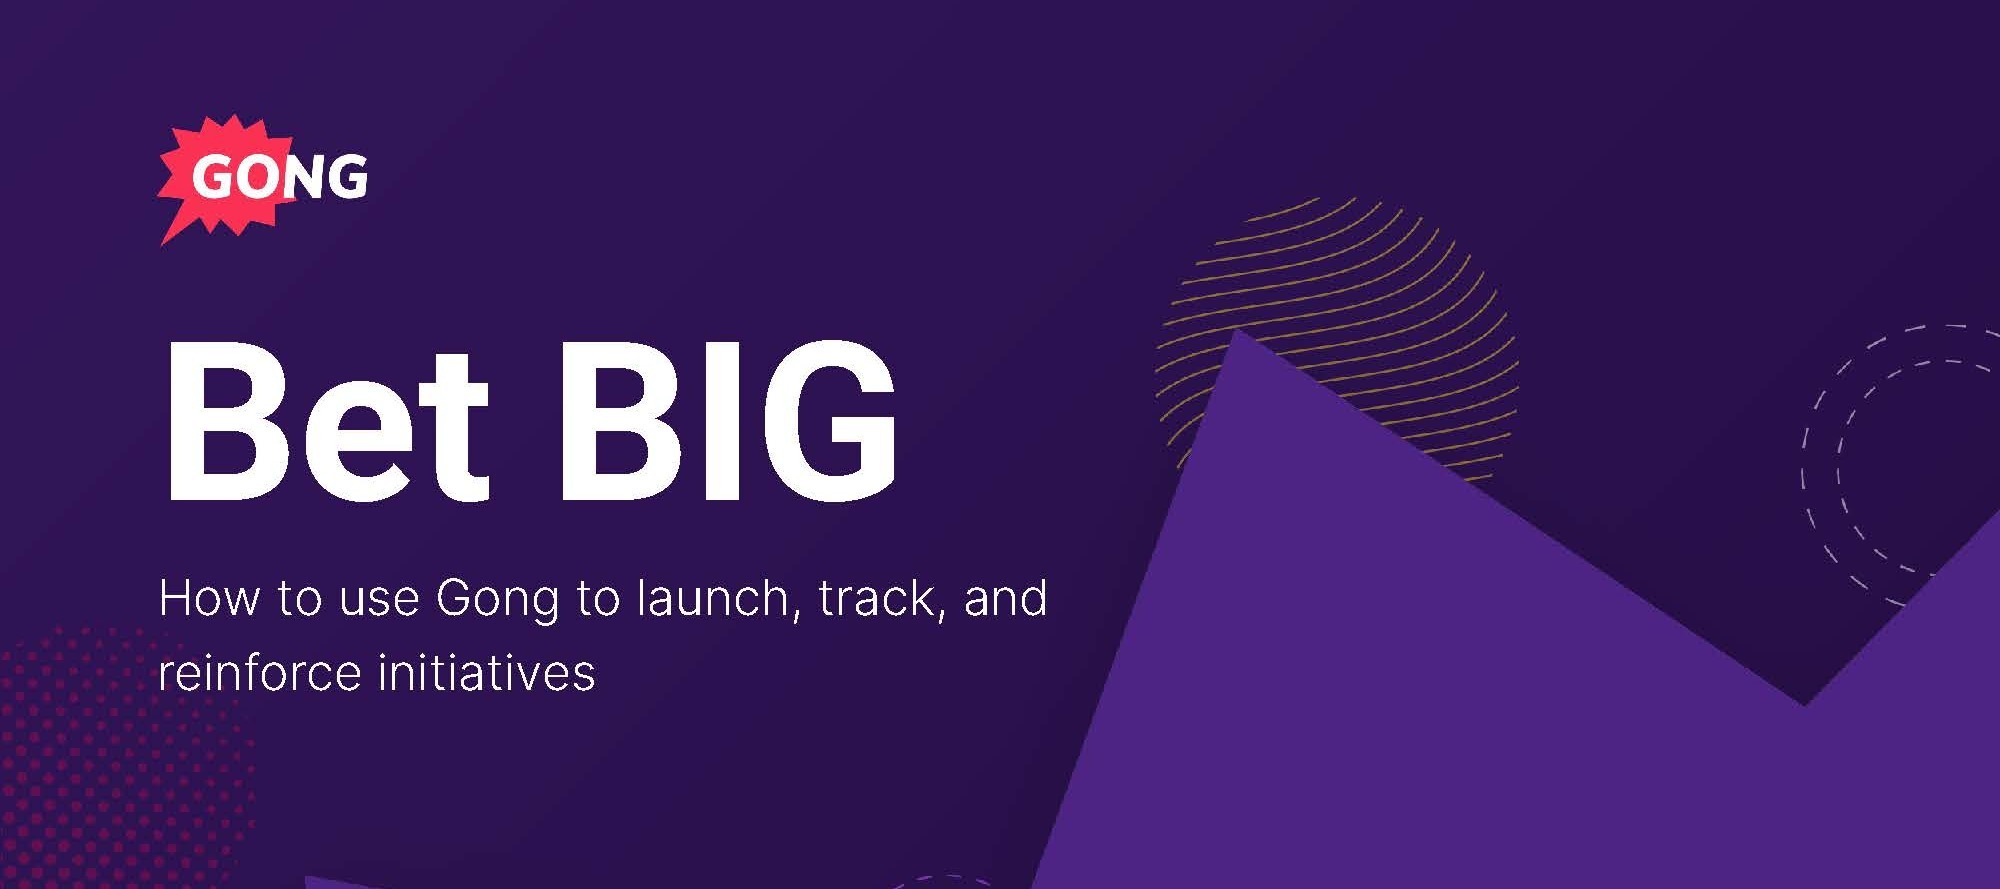 Tips from ‘Bet BIG: How to use Gong to launch, track, and reinforce your initiatives’